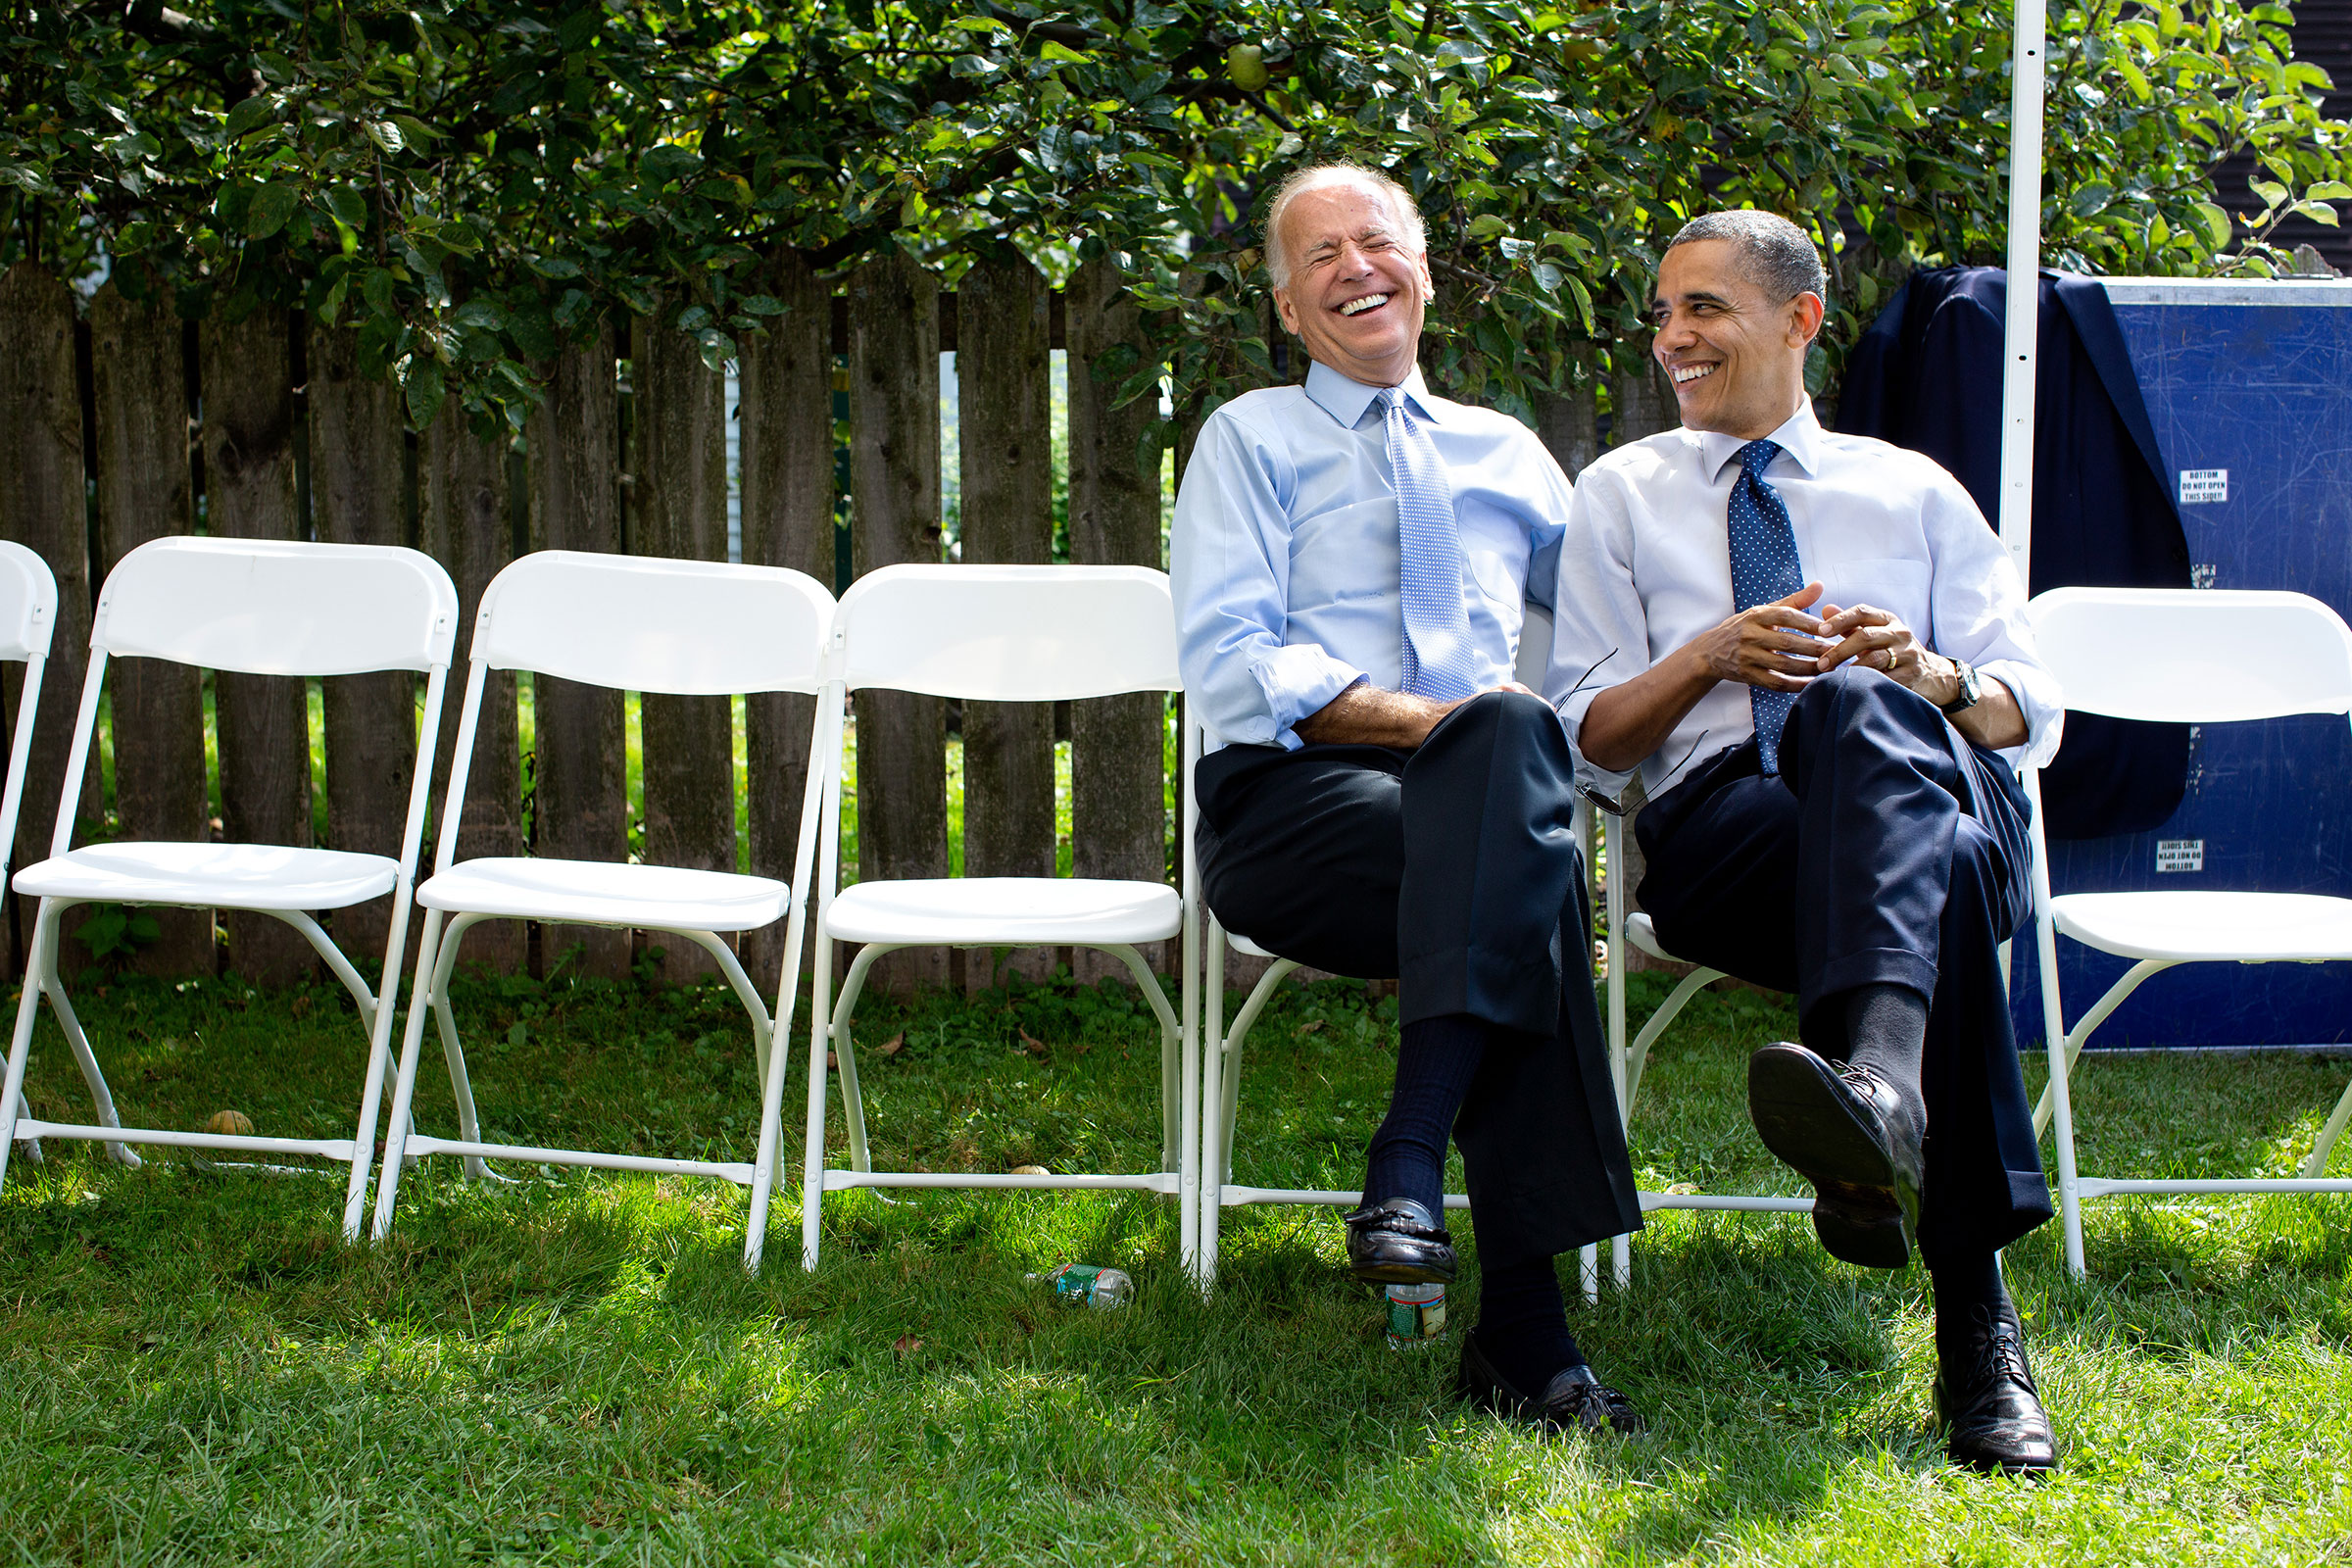 President Barack Obama and Vice President Joe Biden talk backstage during a grassroots campaign event at Strawbery Banke Museum in Portsmouth, N.H., on Sept. 7, 2012. (Official White House Photo by Pete Souza)